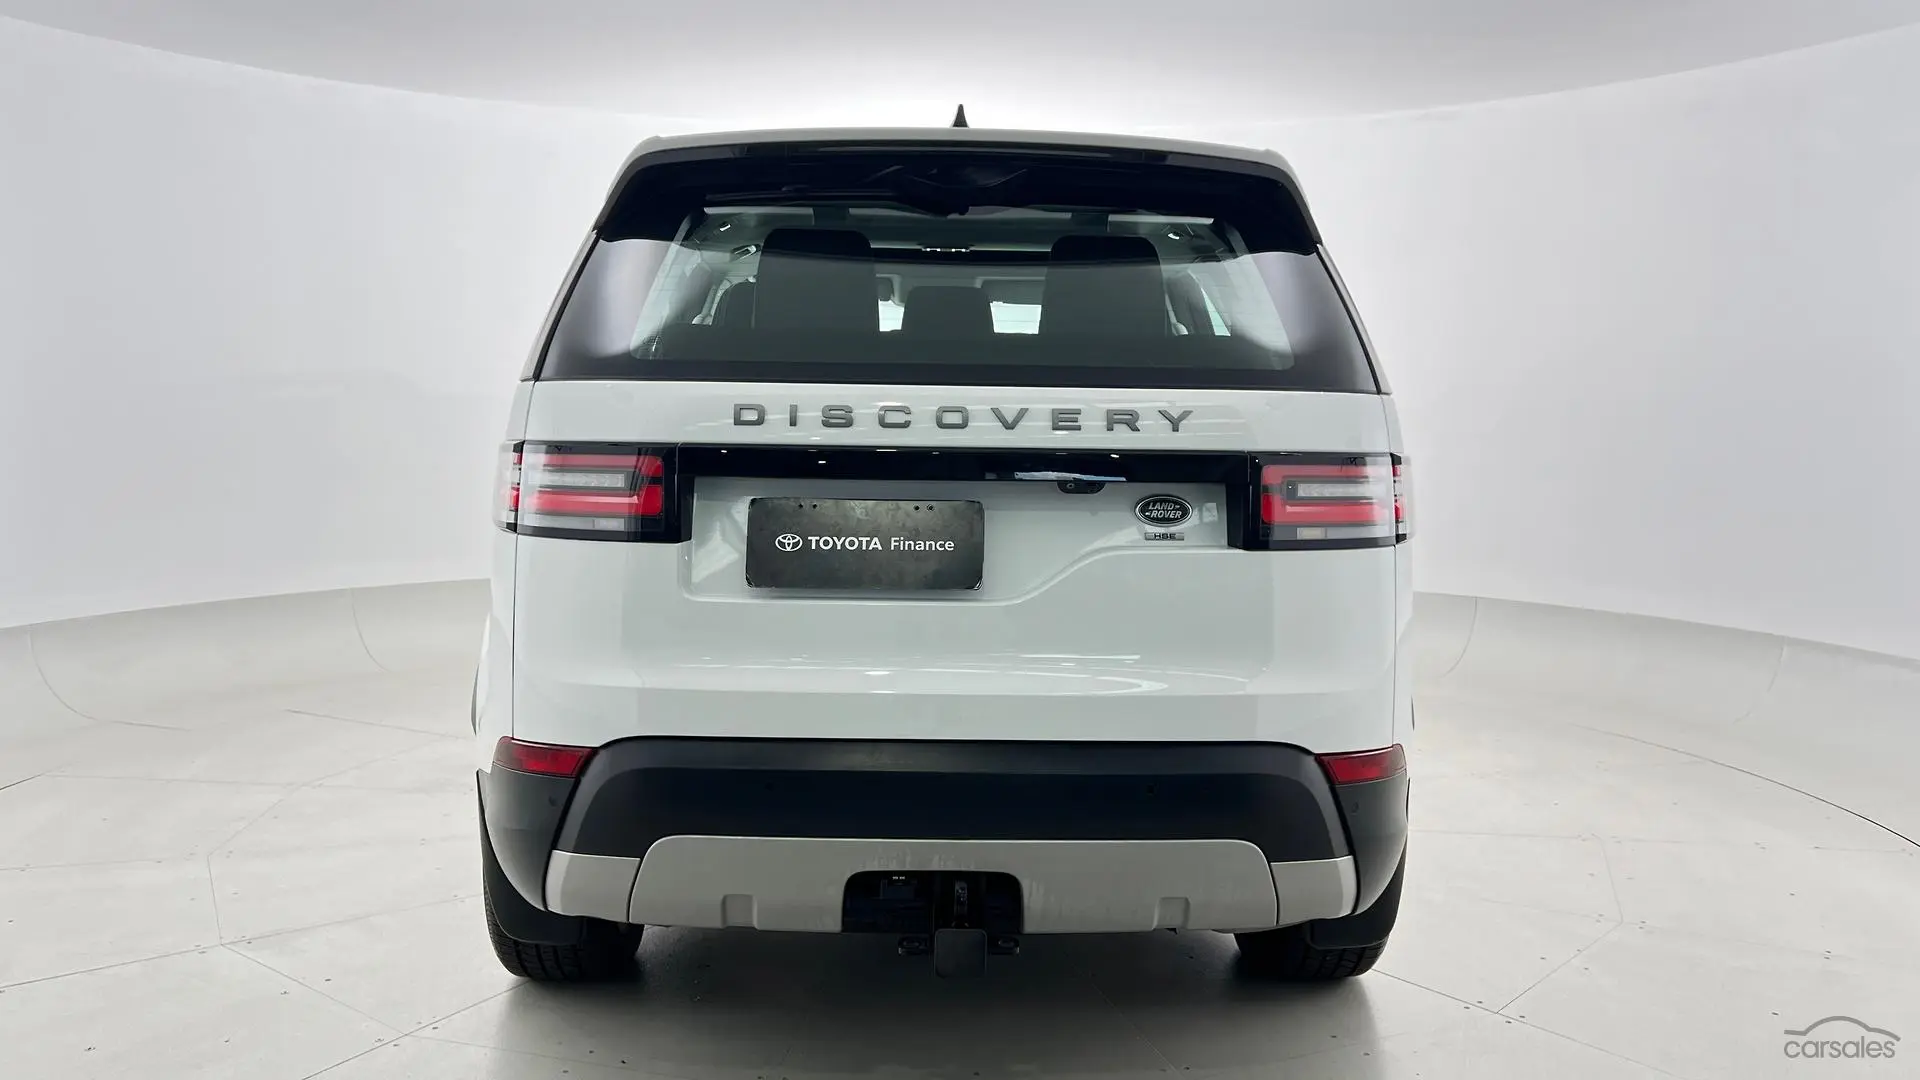 2018 Land Rover Discovery Image 7